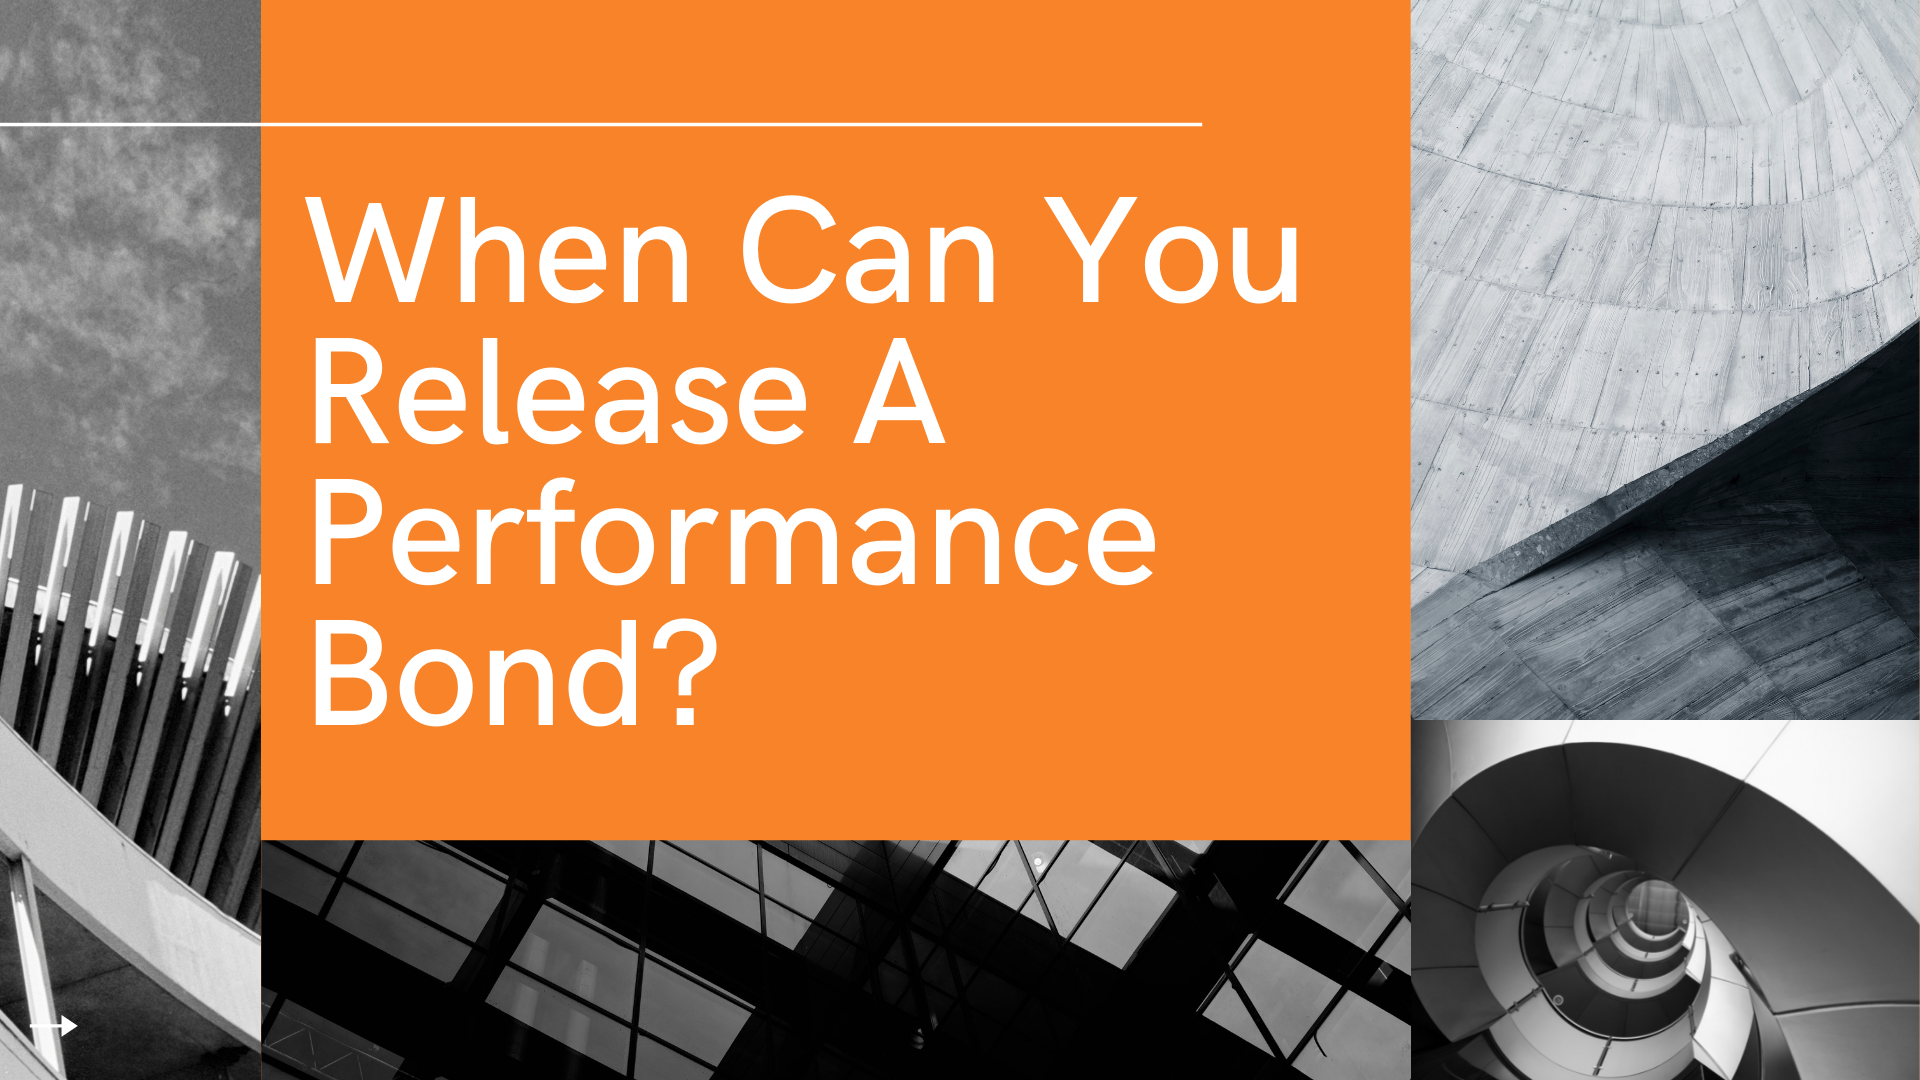 performance bond - When should a performance bond be released buildings with orange textbox